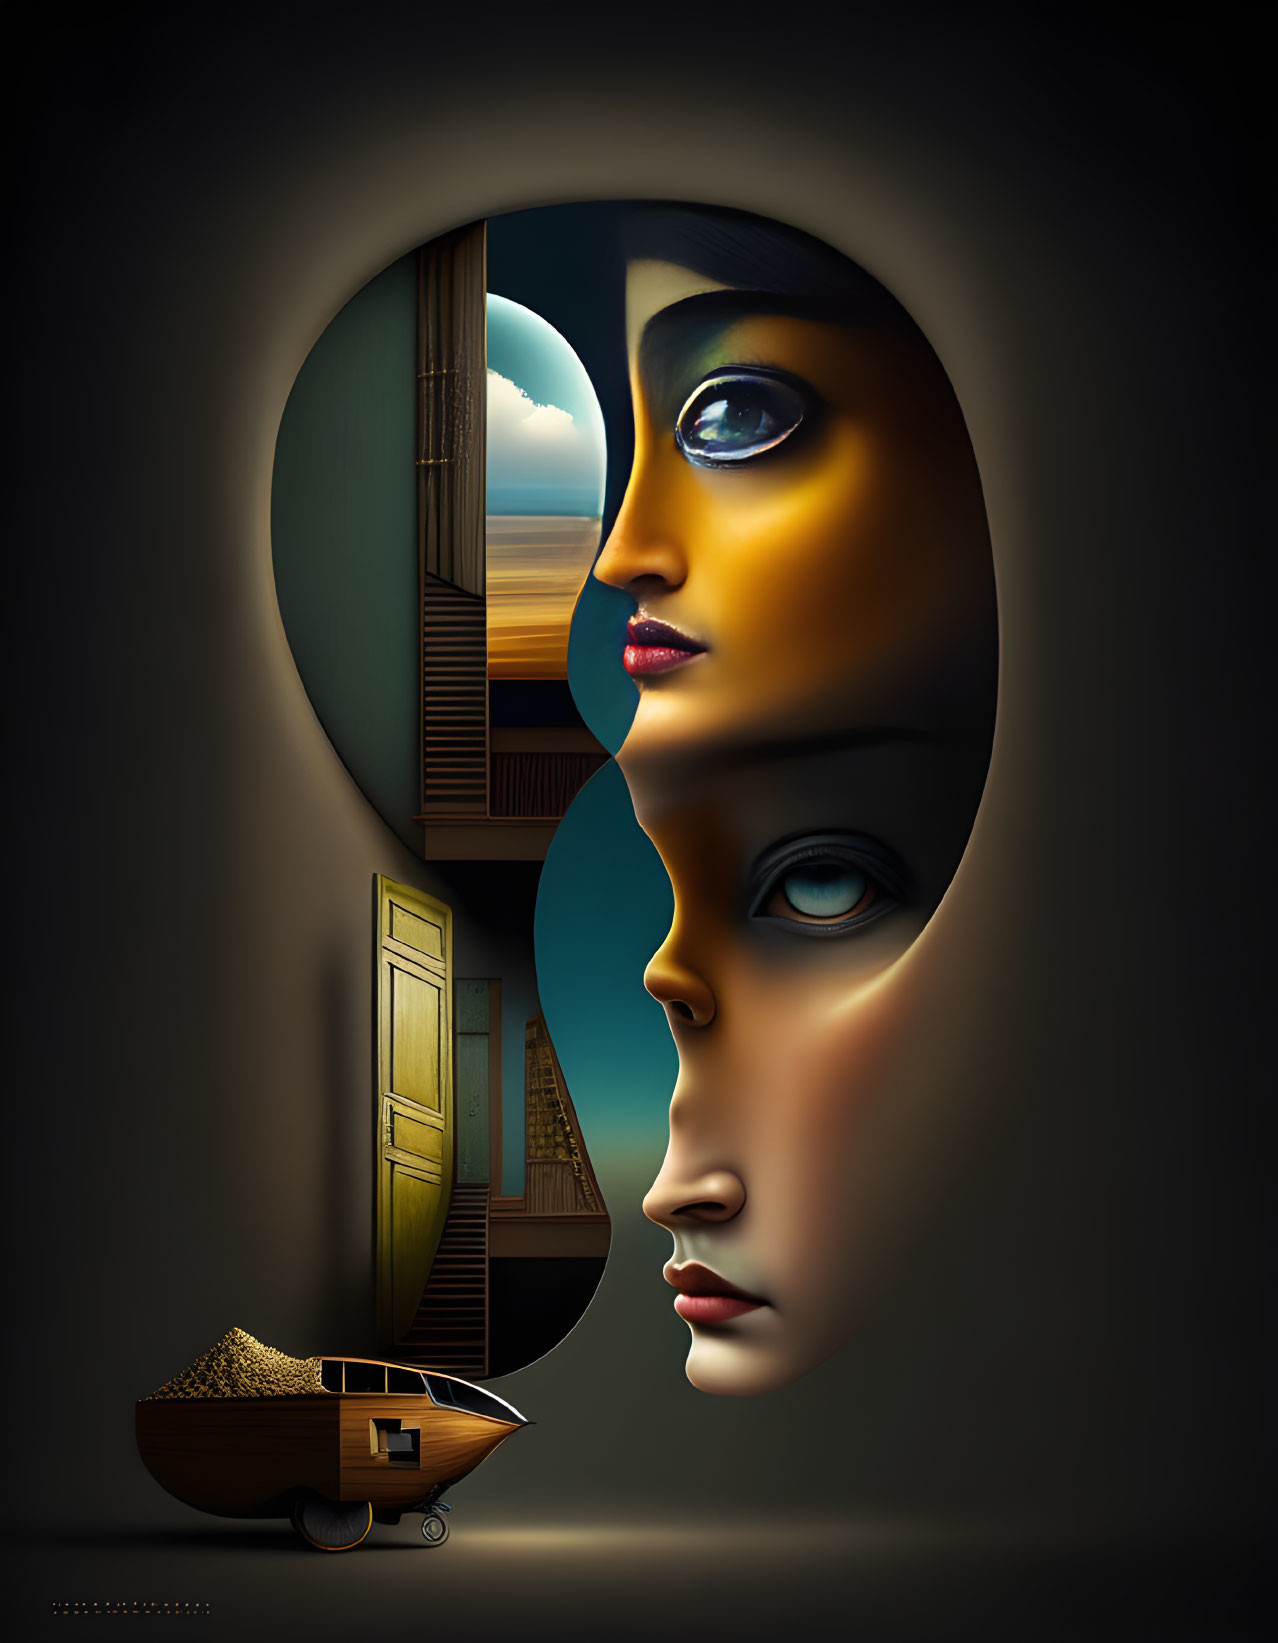 Surreal artwork: Two faces merge into keyhole shape with contrasting lighting, boat carrying sand.